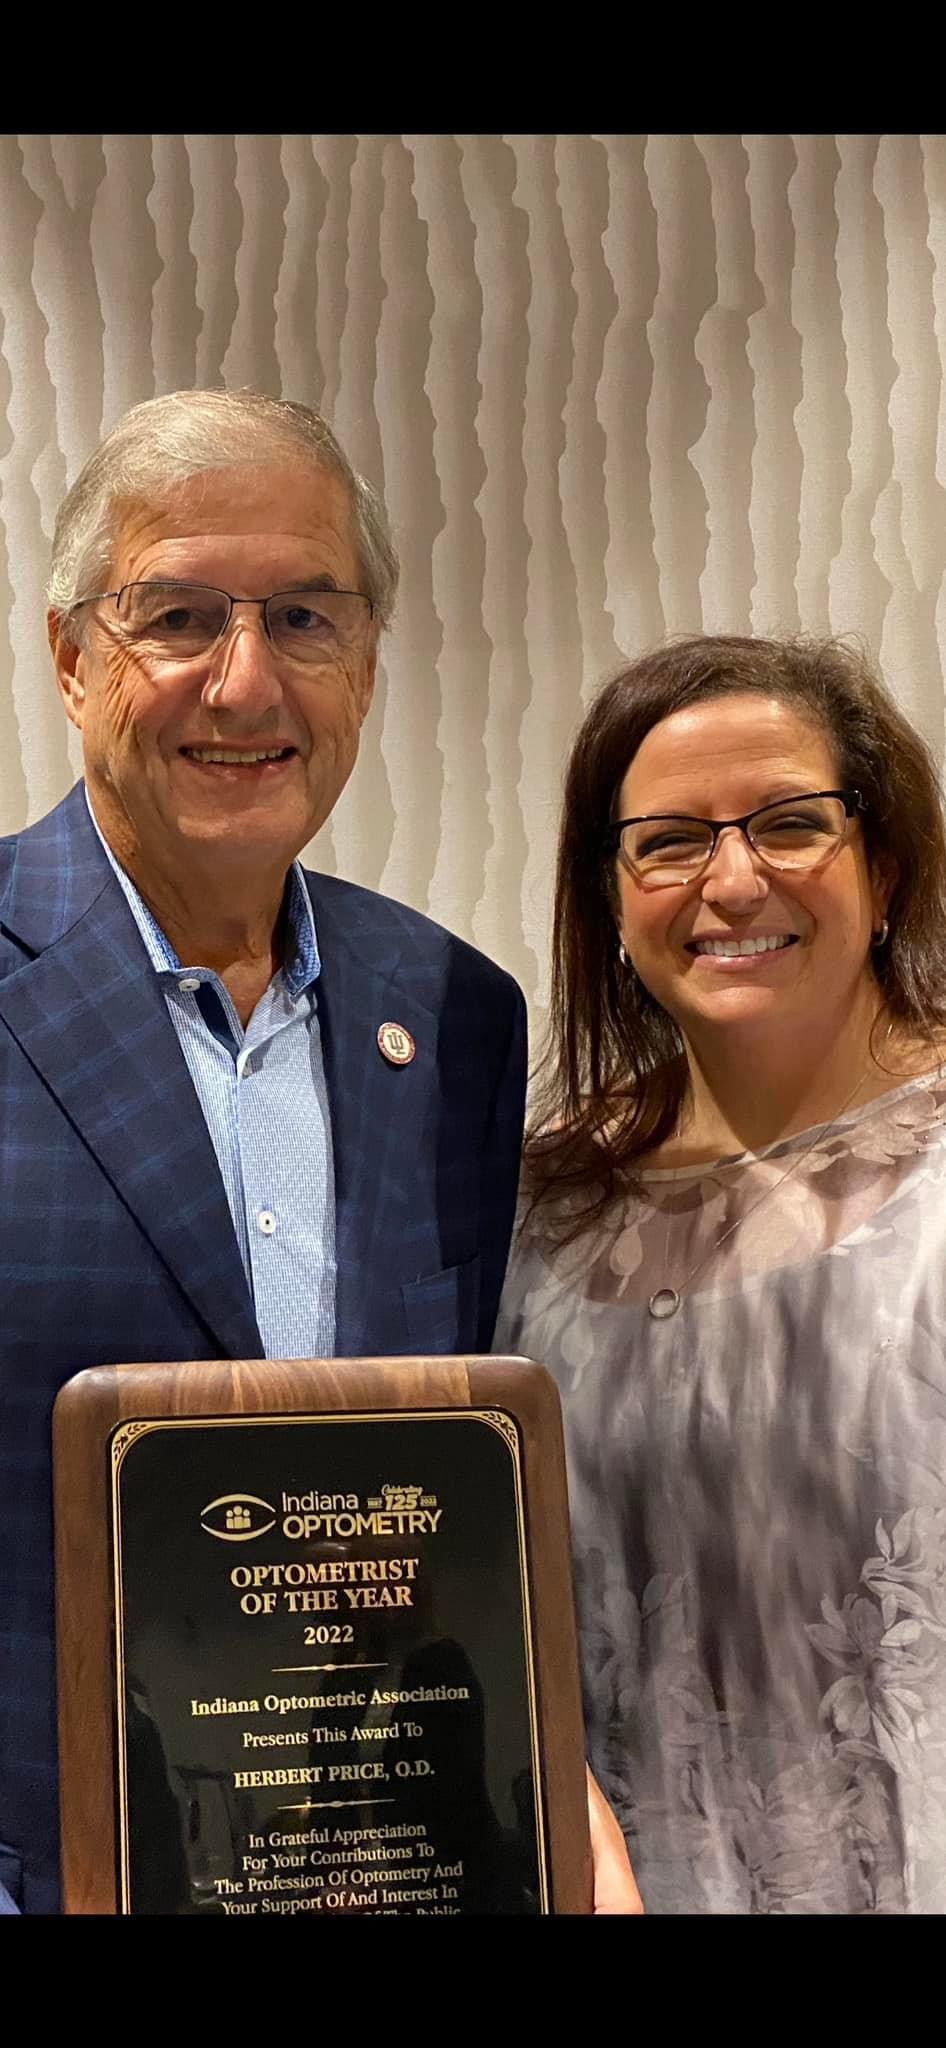 Dr. Herbert Price with his daughter Dr. Monica Price Kowaleski - he is holding his optometrist of the year plague from the Indiana Optometric Association